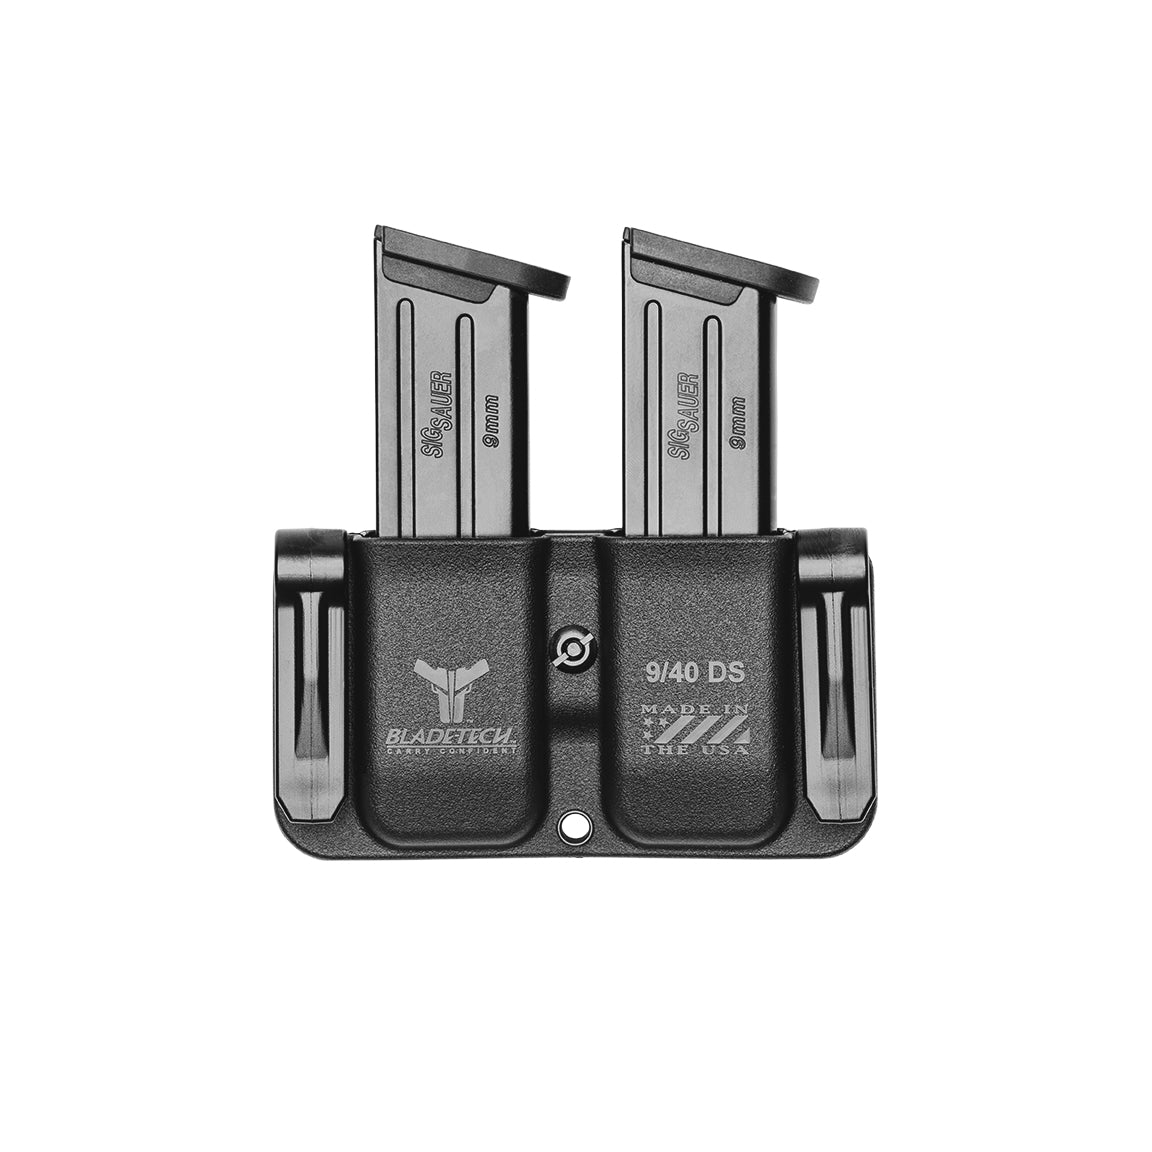  OWB Double Mag Pouch for S&W M&P 9/40, Sig P320, Beretta  92/96, Springfield XD 9/40 & More - USA Made - Signature Double Magazine  Carrier with Tek-Lok Belt Attachment Clip